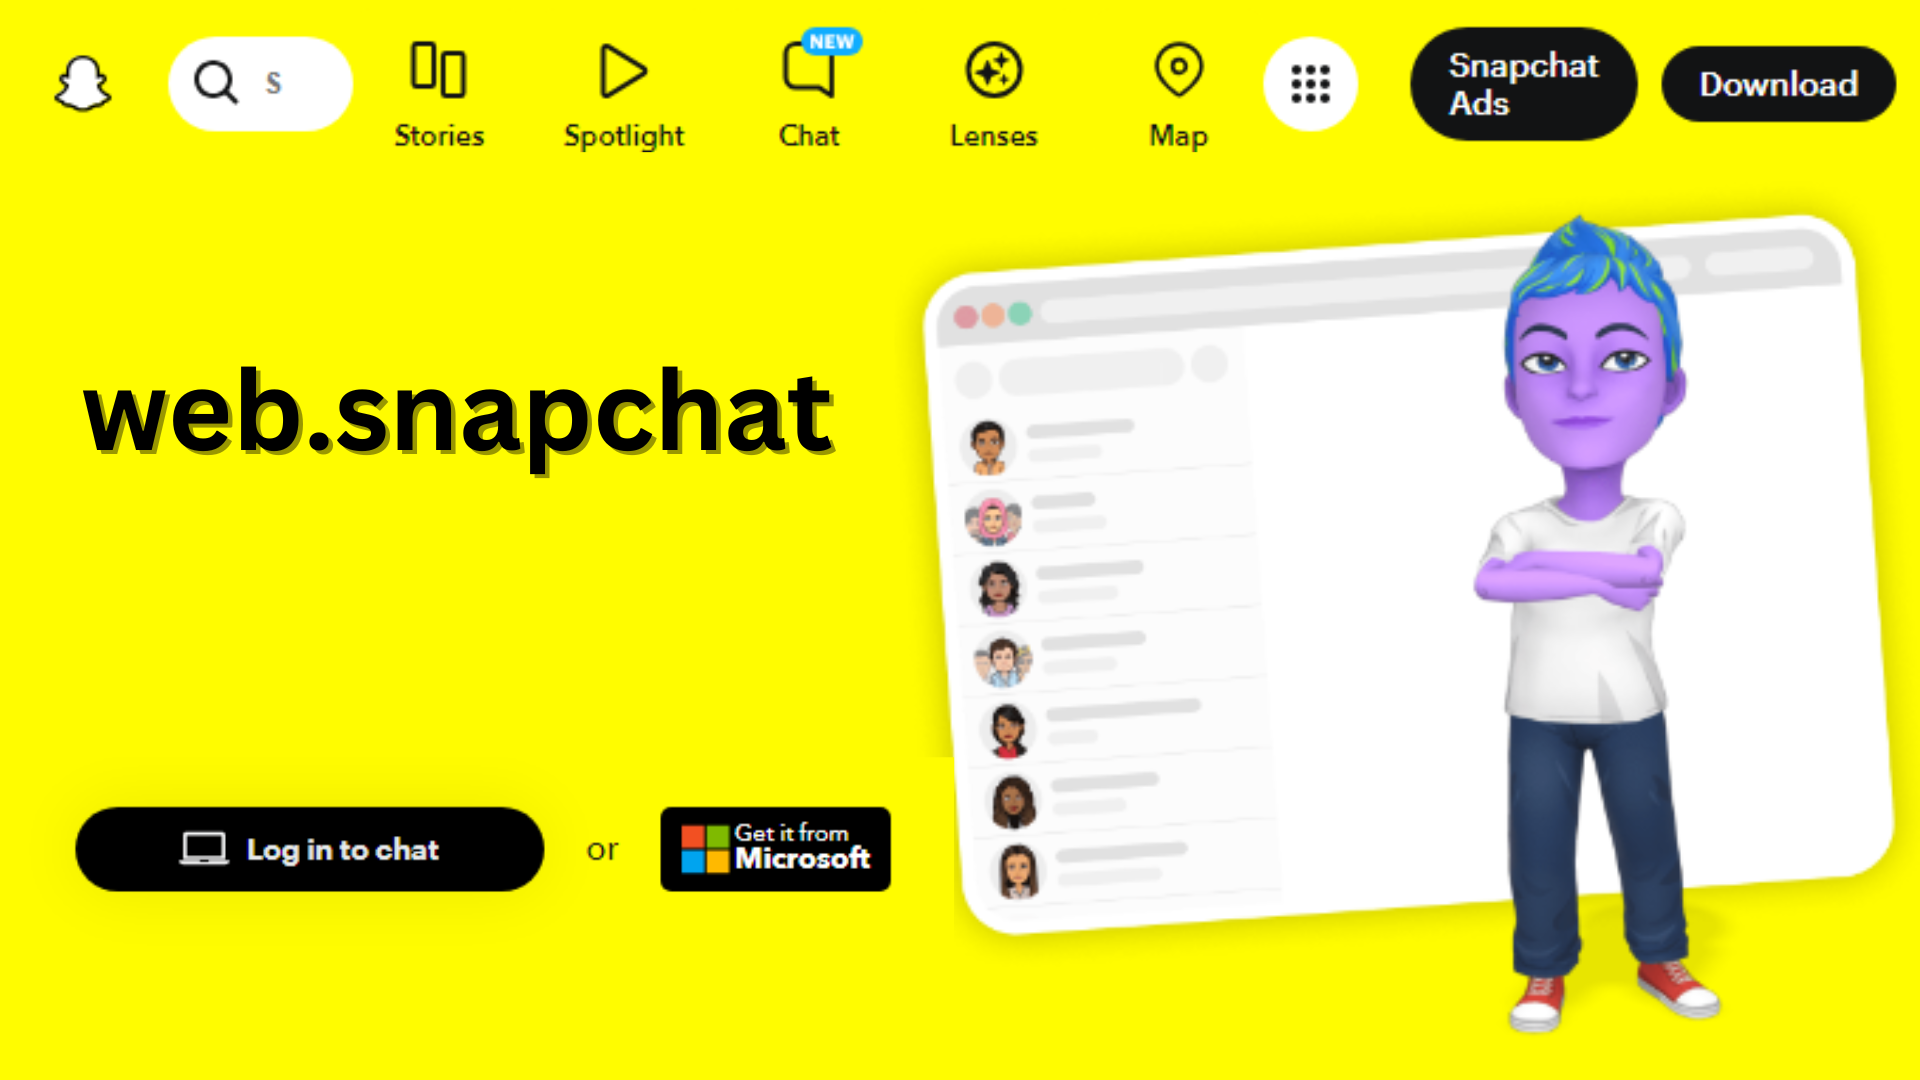 web.snapchat: login and connect on desktop